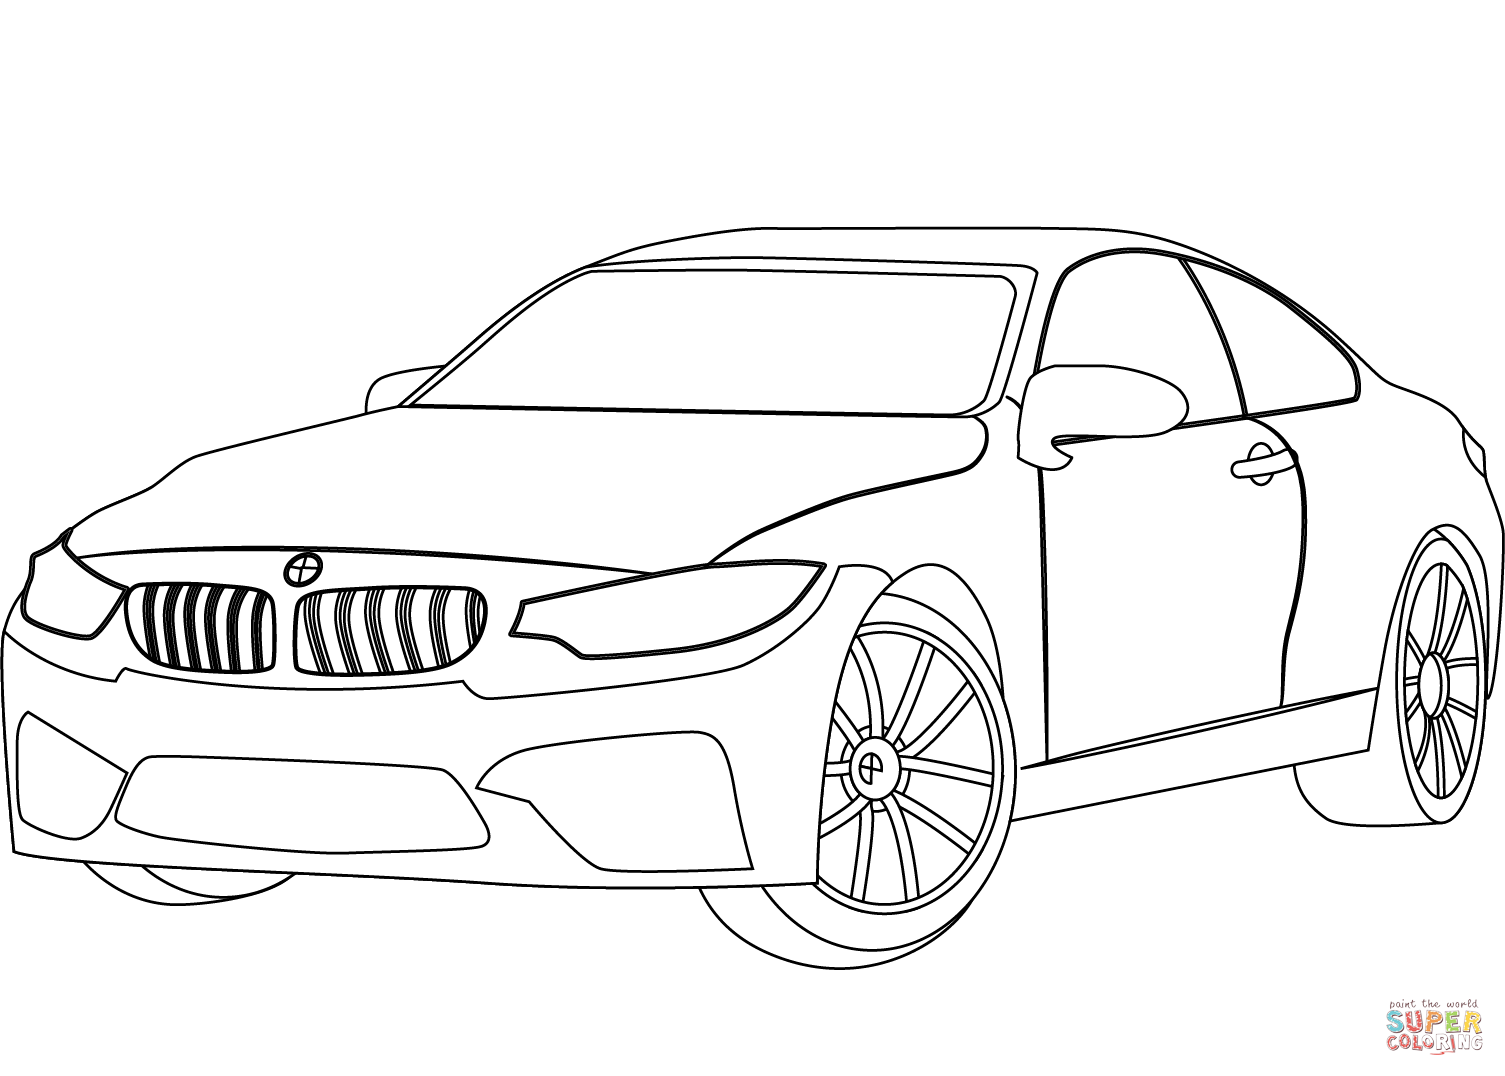 BMW M4 coloring page | Free Printable Coloring Pages